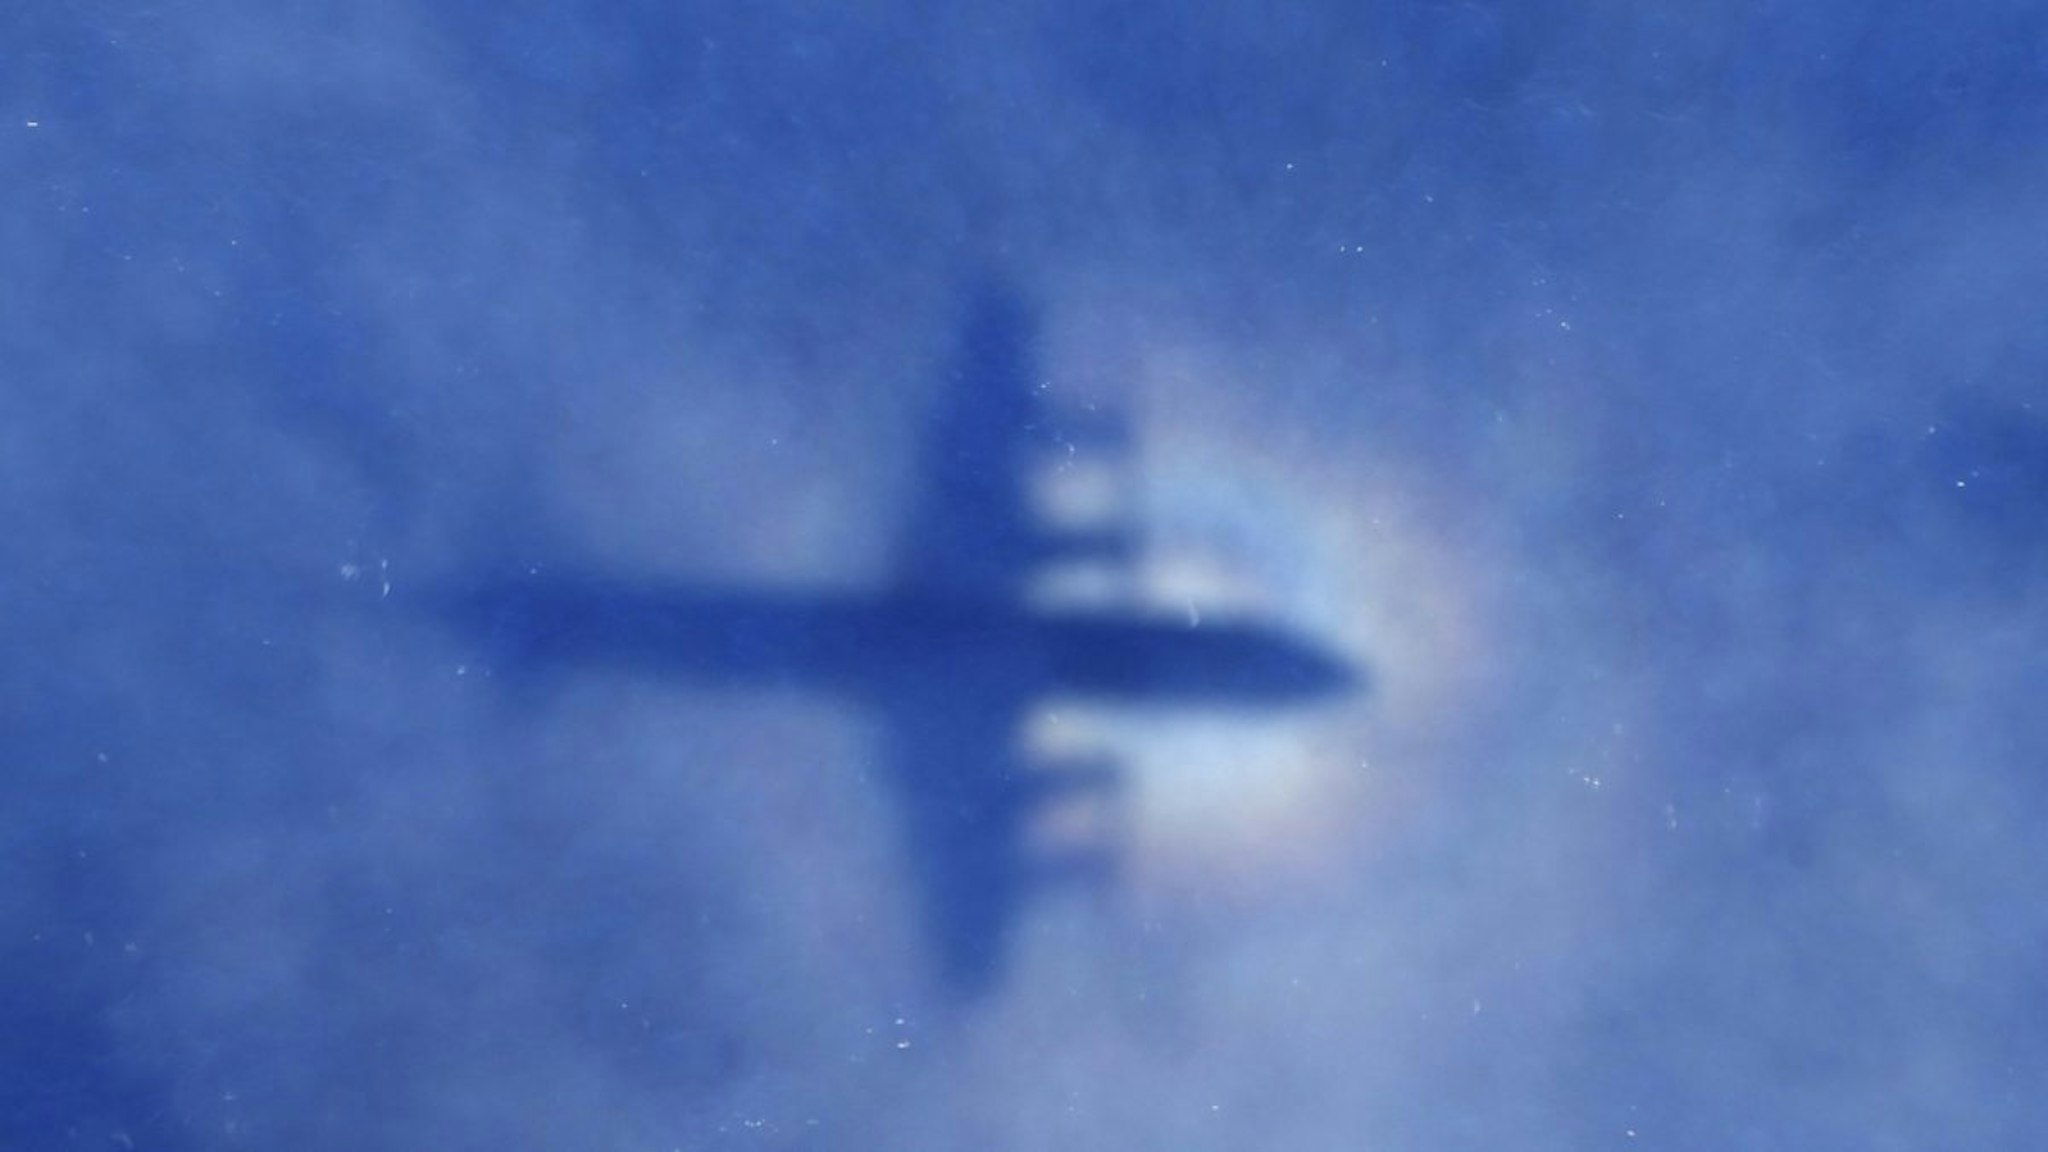 This shadow of a Royal New Zealand Air Force P3 Orion aircraft is seen on low cloud cover while it searches for missing Malaysia Airlines flight MH370, over the Indian Ocean on March 31, 2014.